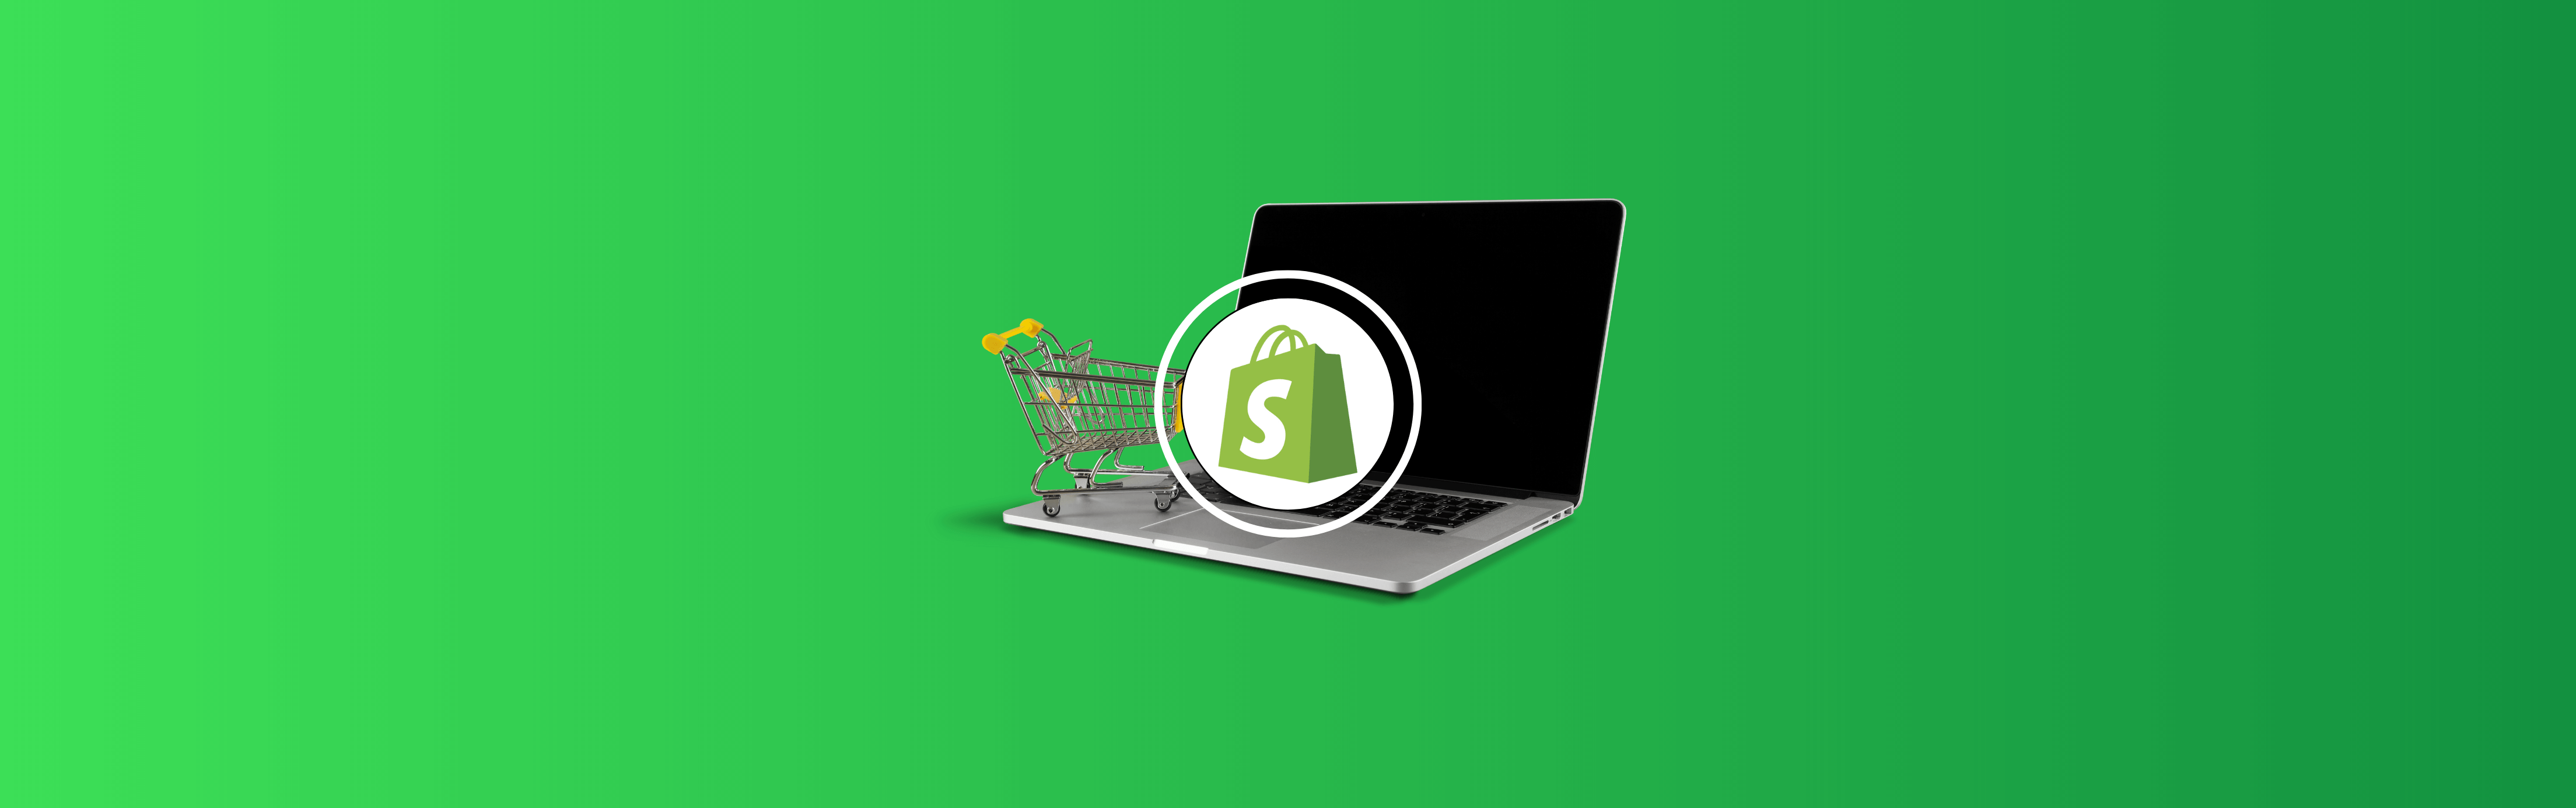 How to Start a Shopify Store and Run It Successfully